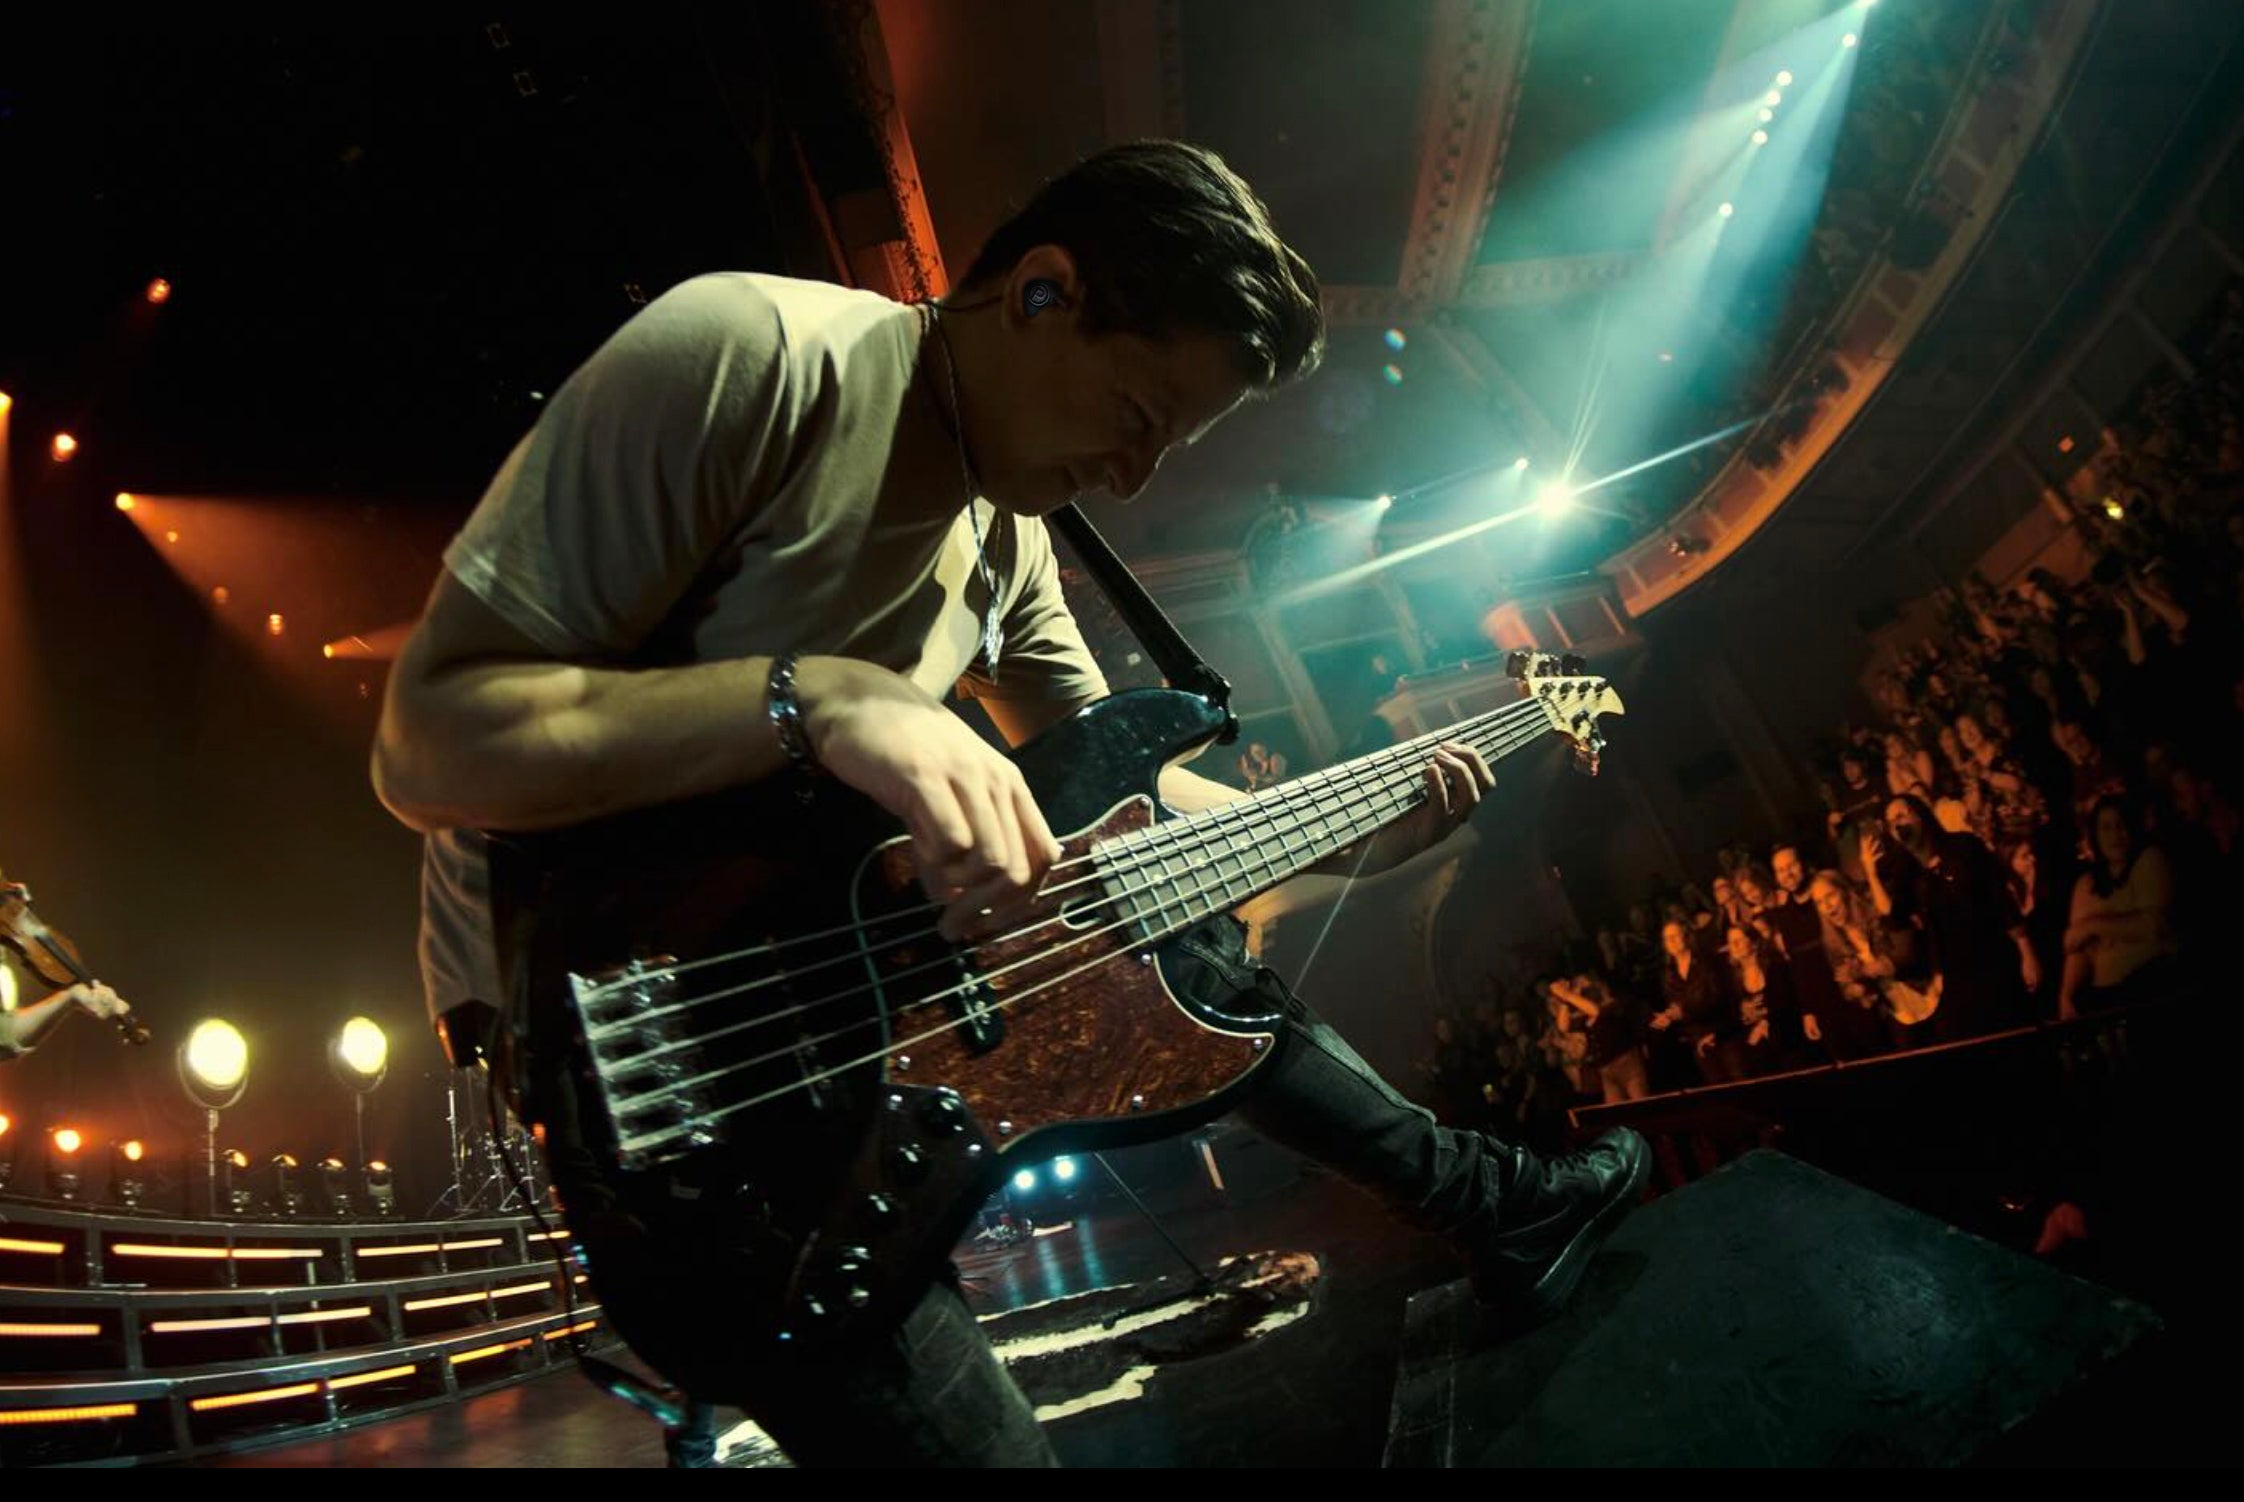 Justin Kudding wearing IEMs and playing bass during live performance with a fish eye effect.